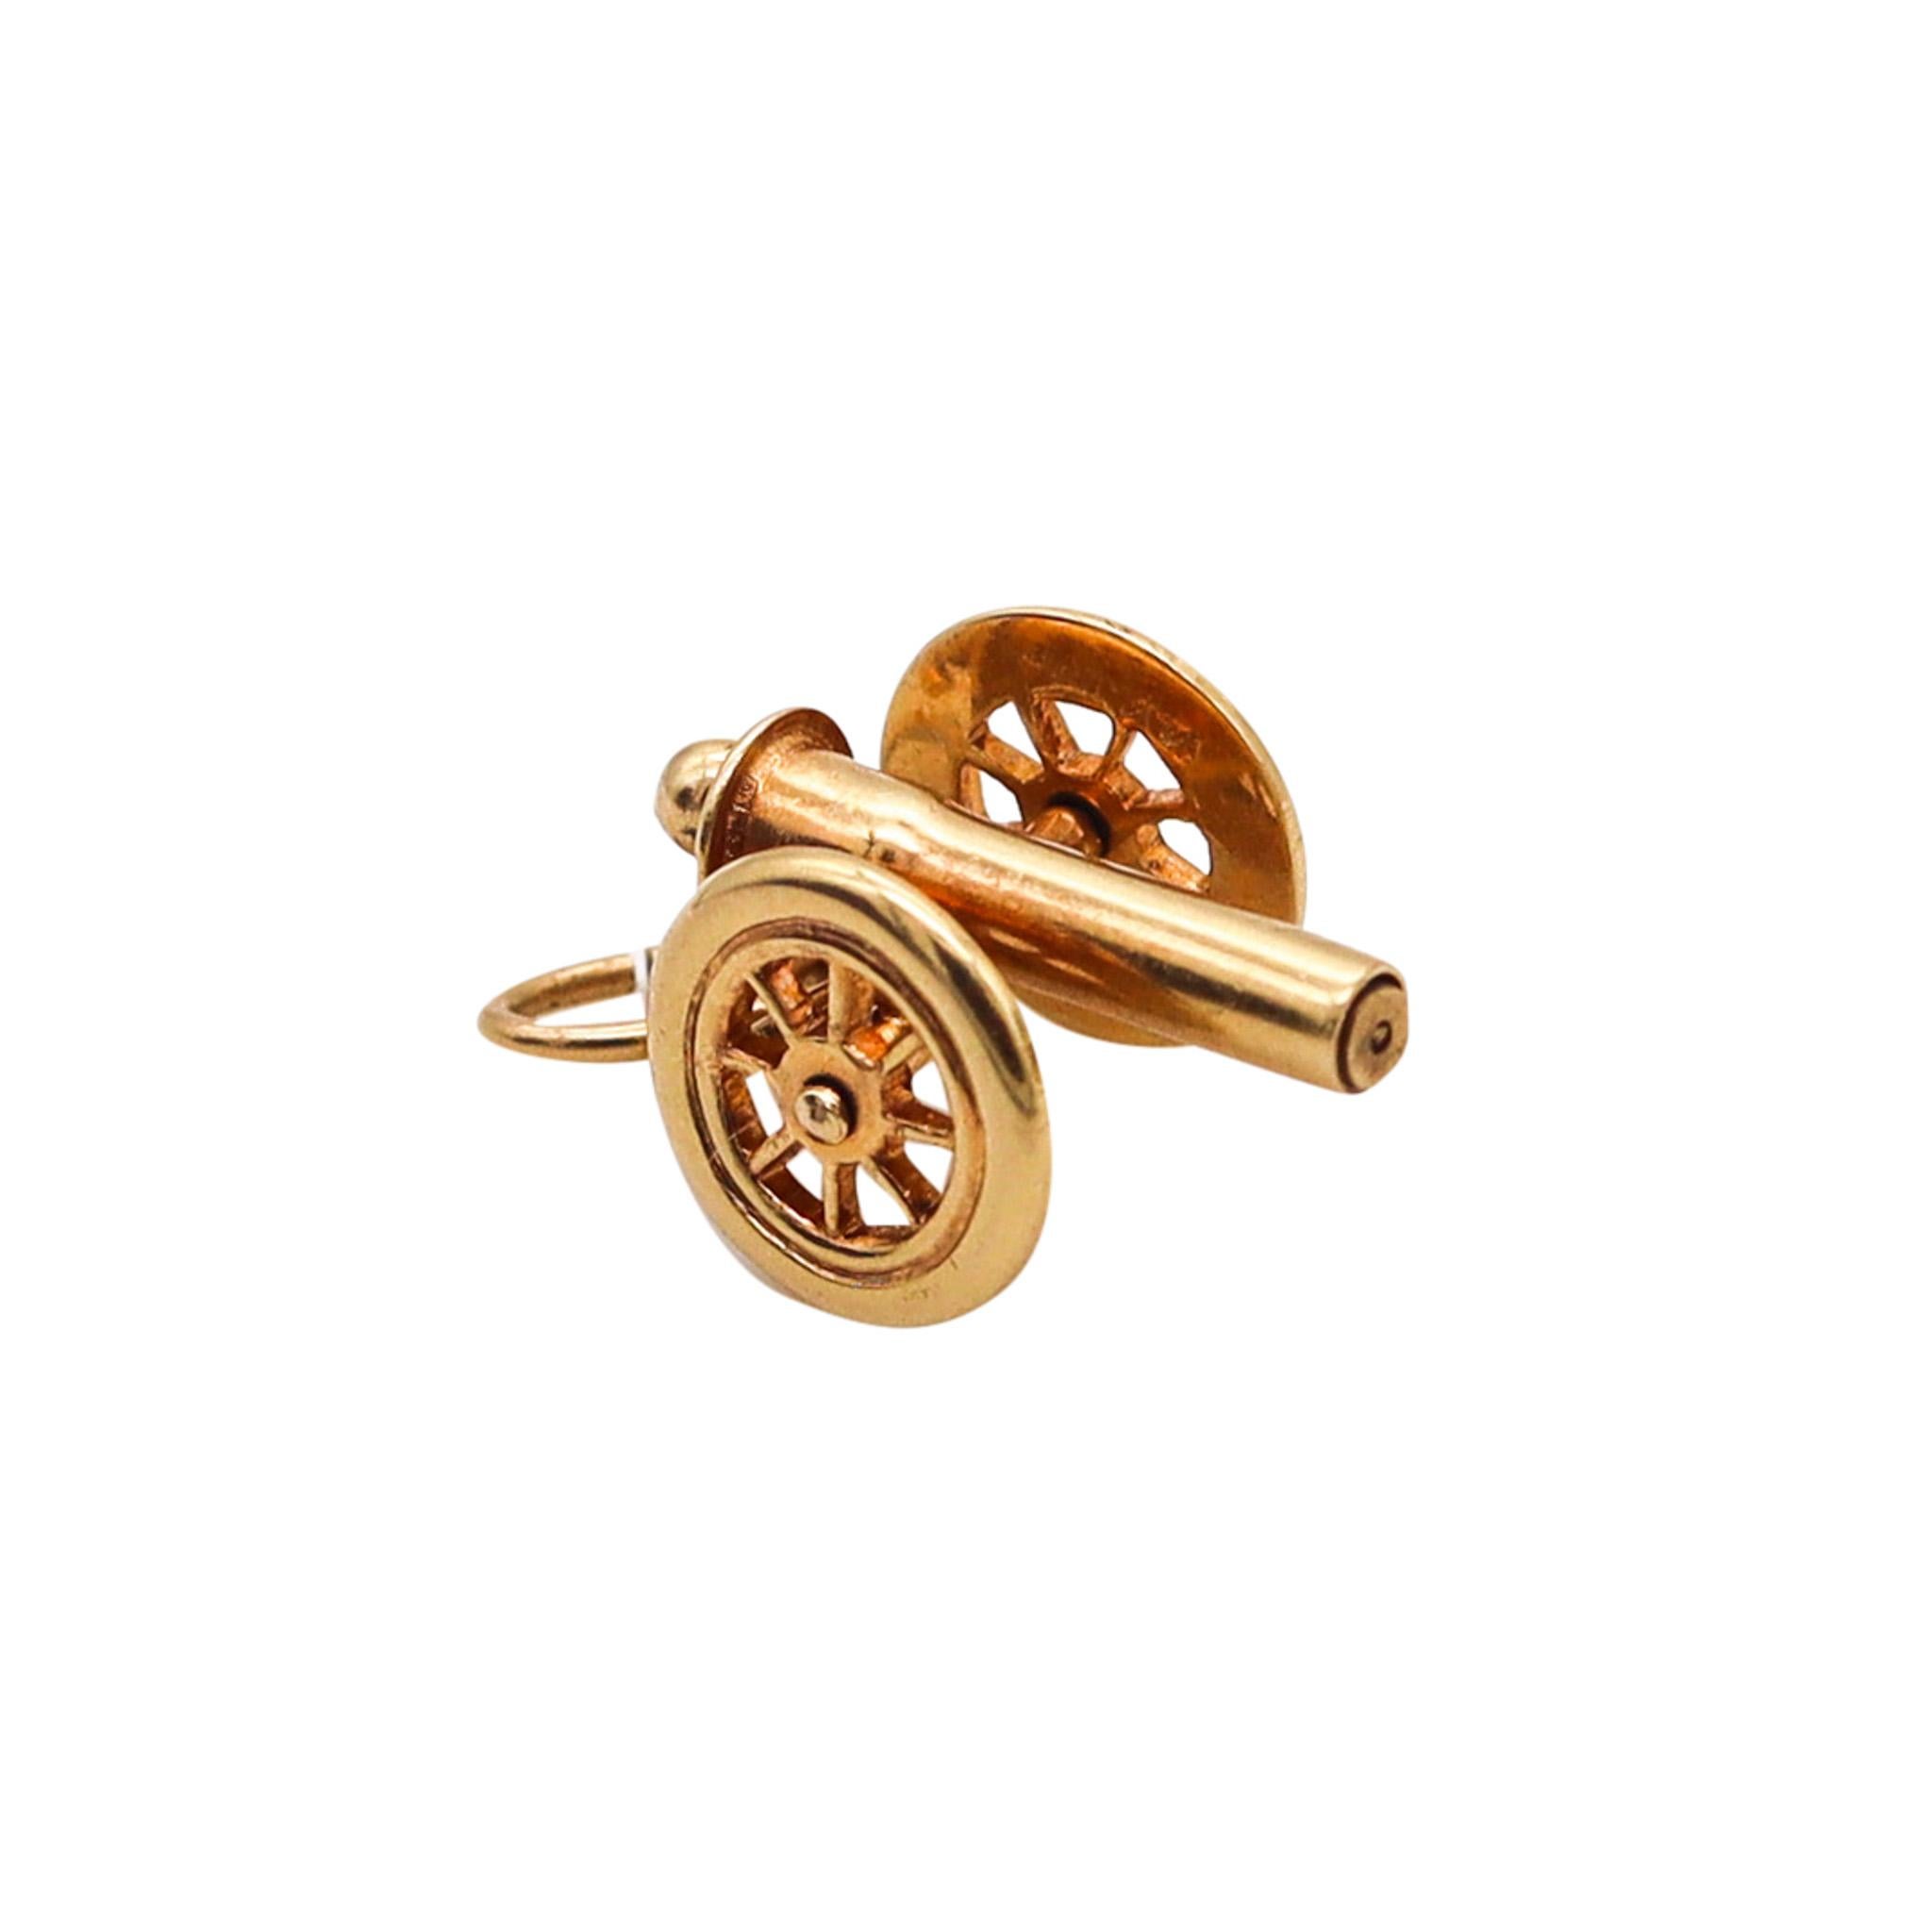 American 1935 Dreco Retro Charm in the Shape of a CANNON In 14Kt Yellow Gold